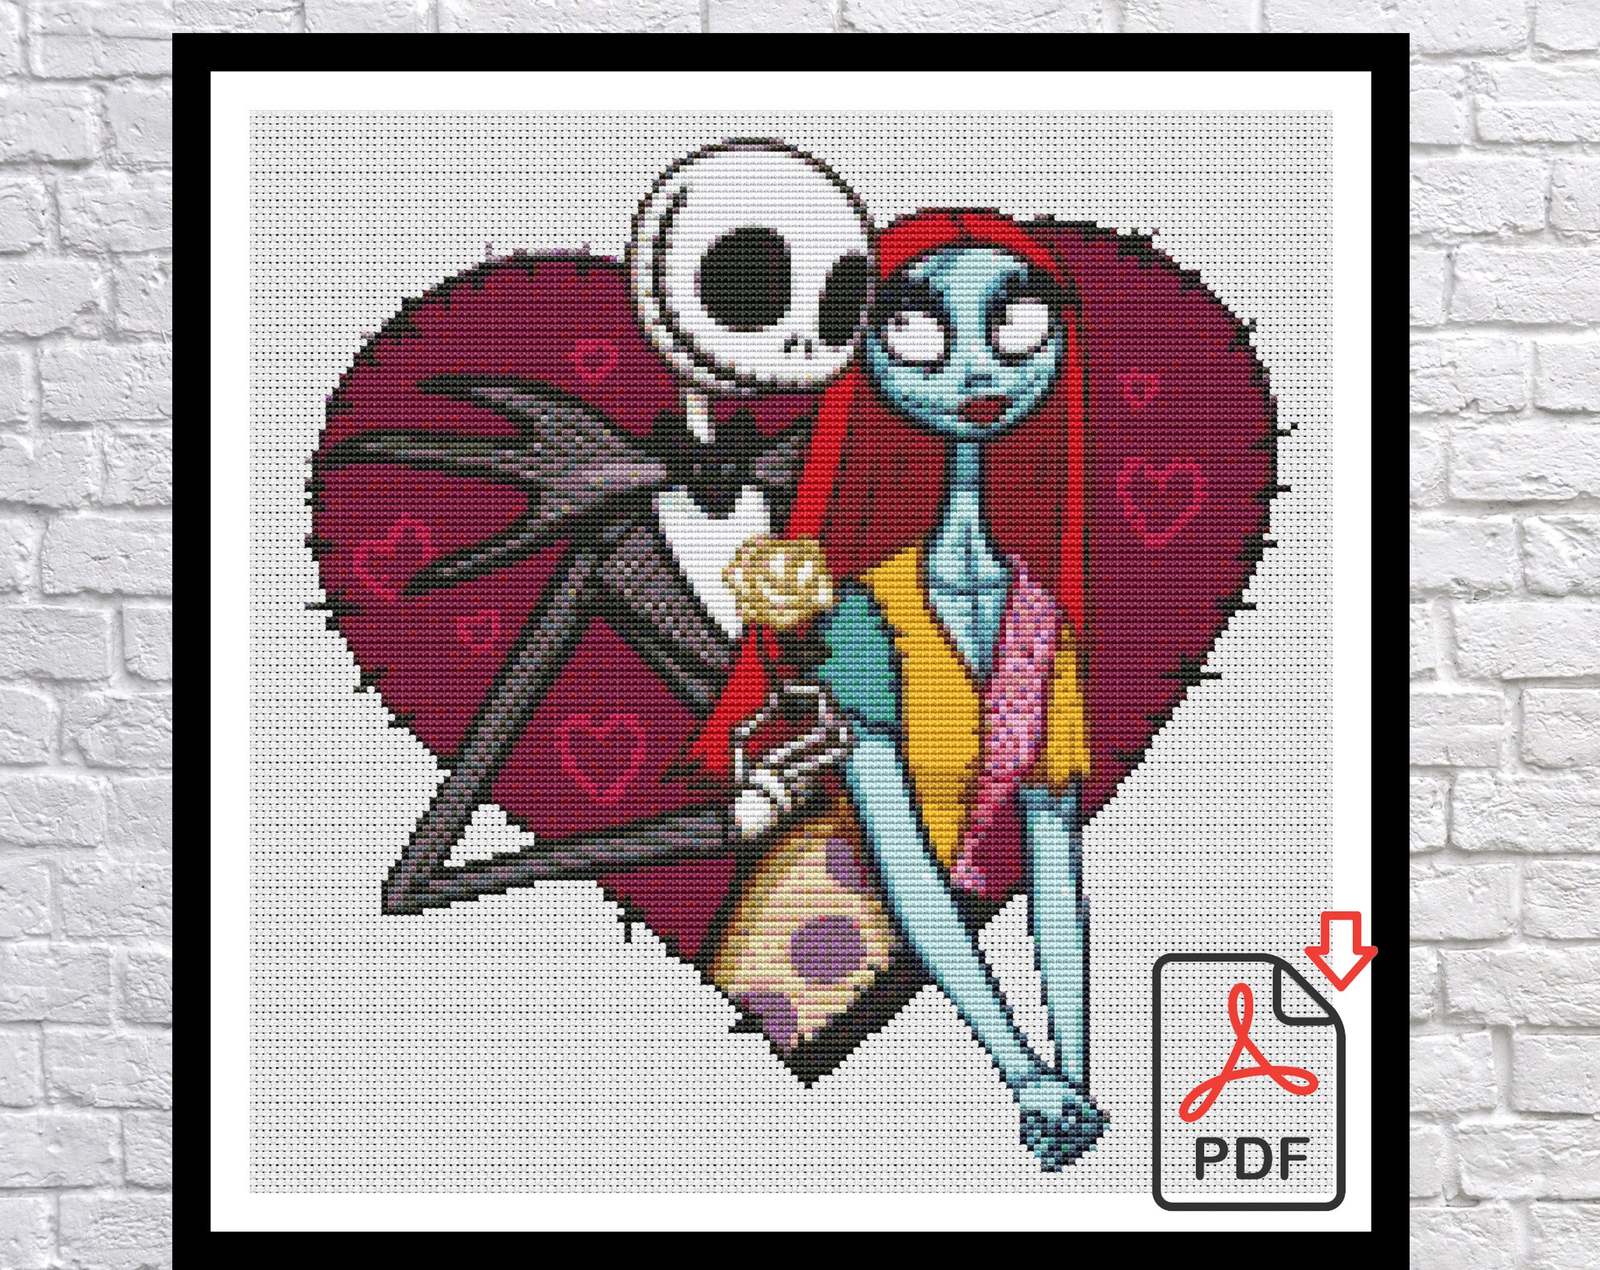 Nightmare Before Christmas Jack And Sally and 10 similar items